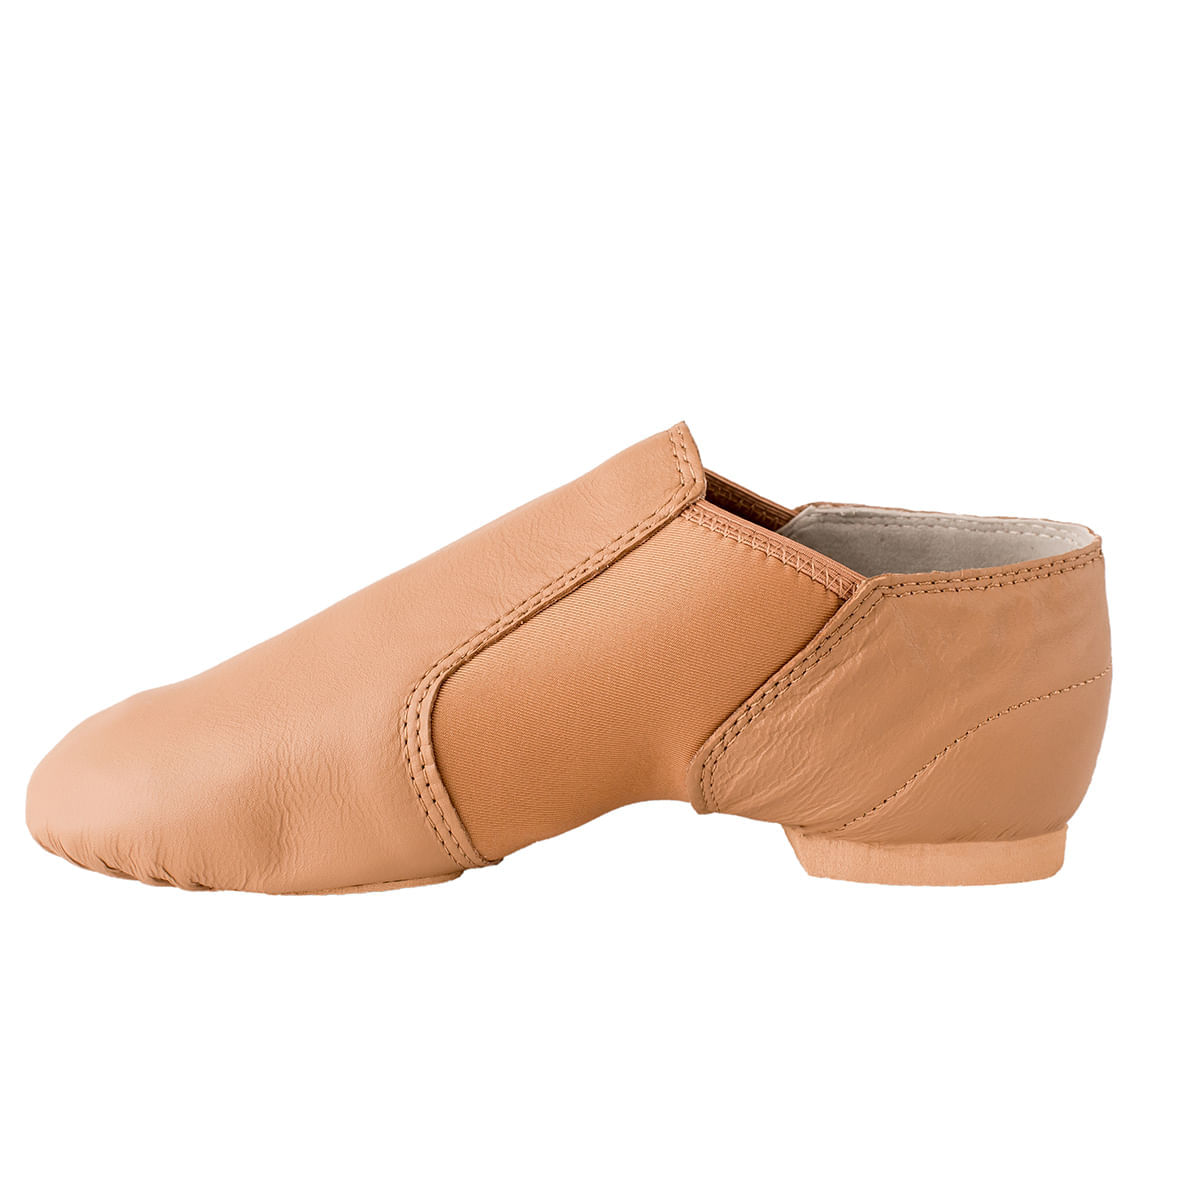 cheap jazz shoes payless